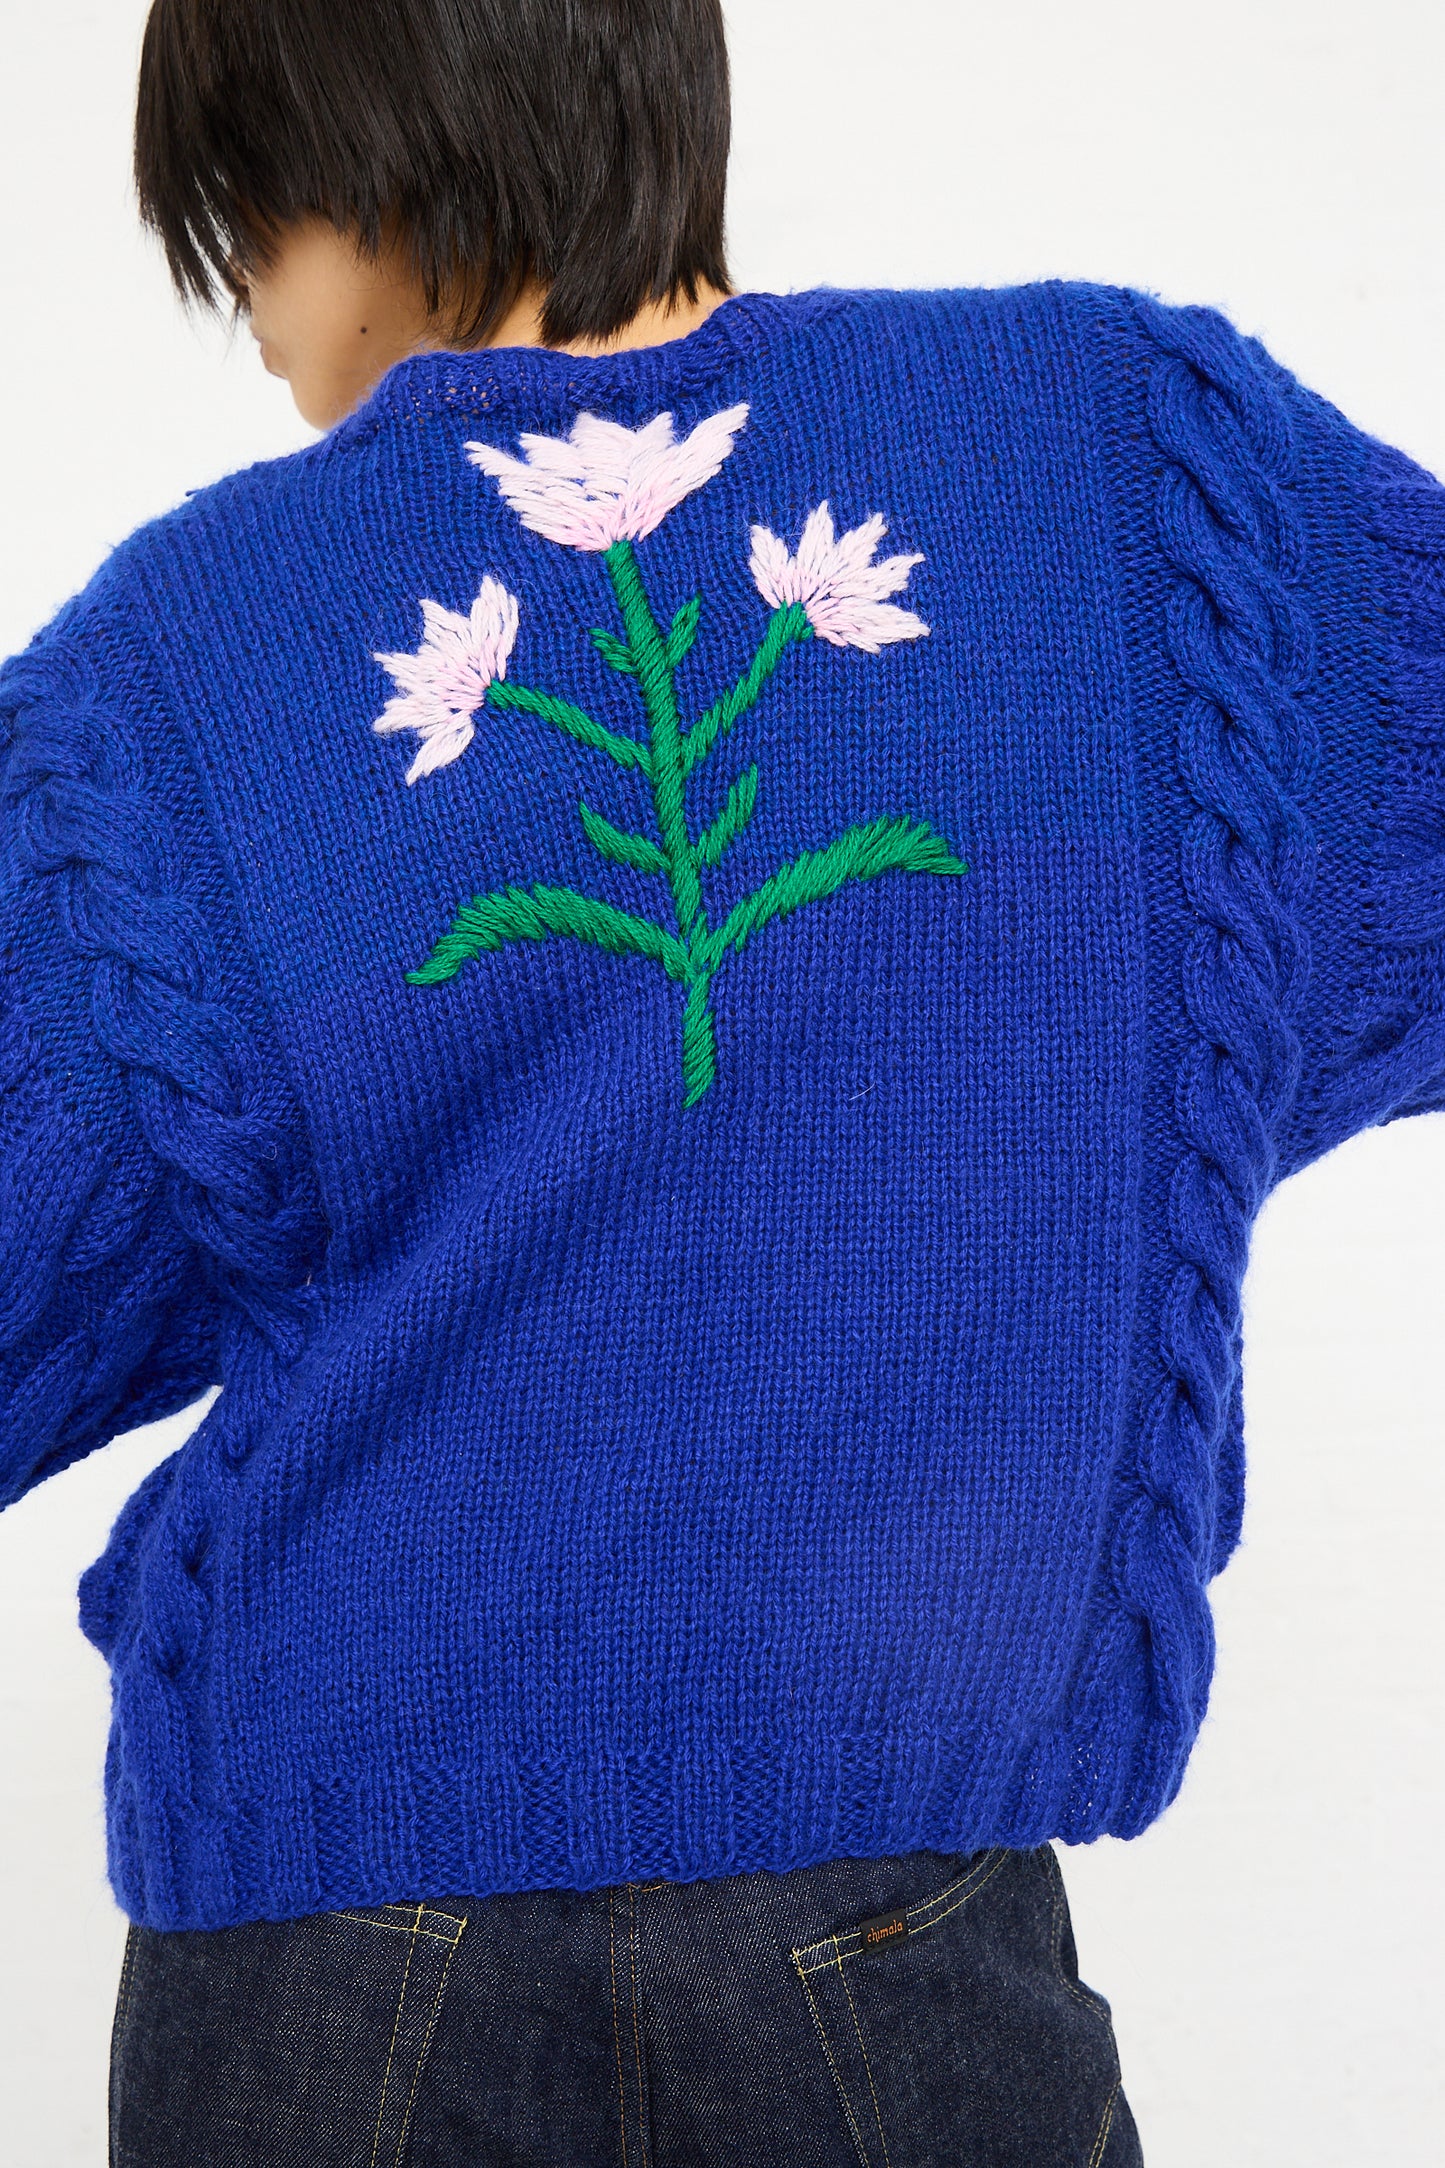 A person from behind wearing a Sofio Gongli Animal Floral Sweater in Blue with cable knit details on the sleeves.